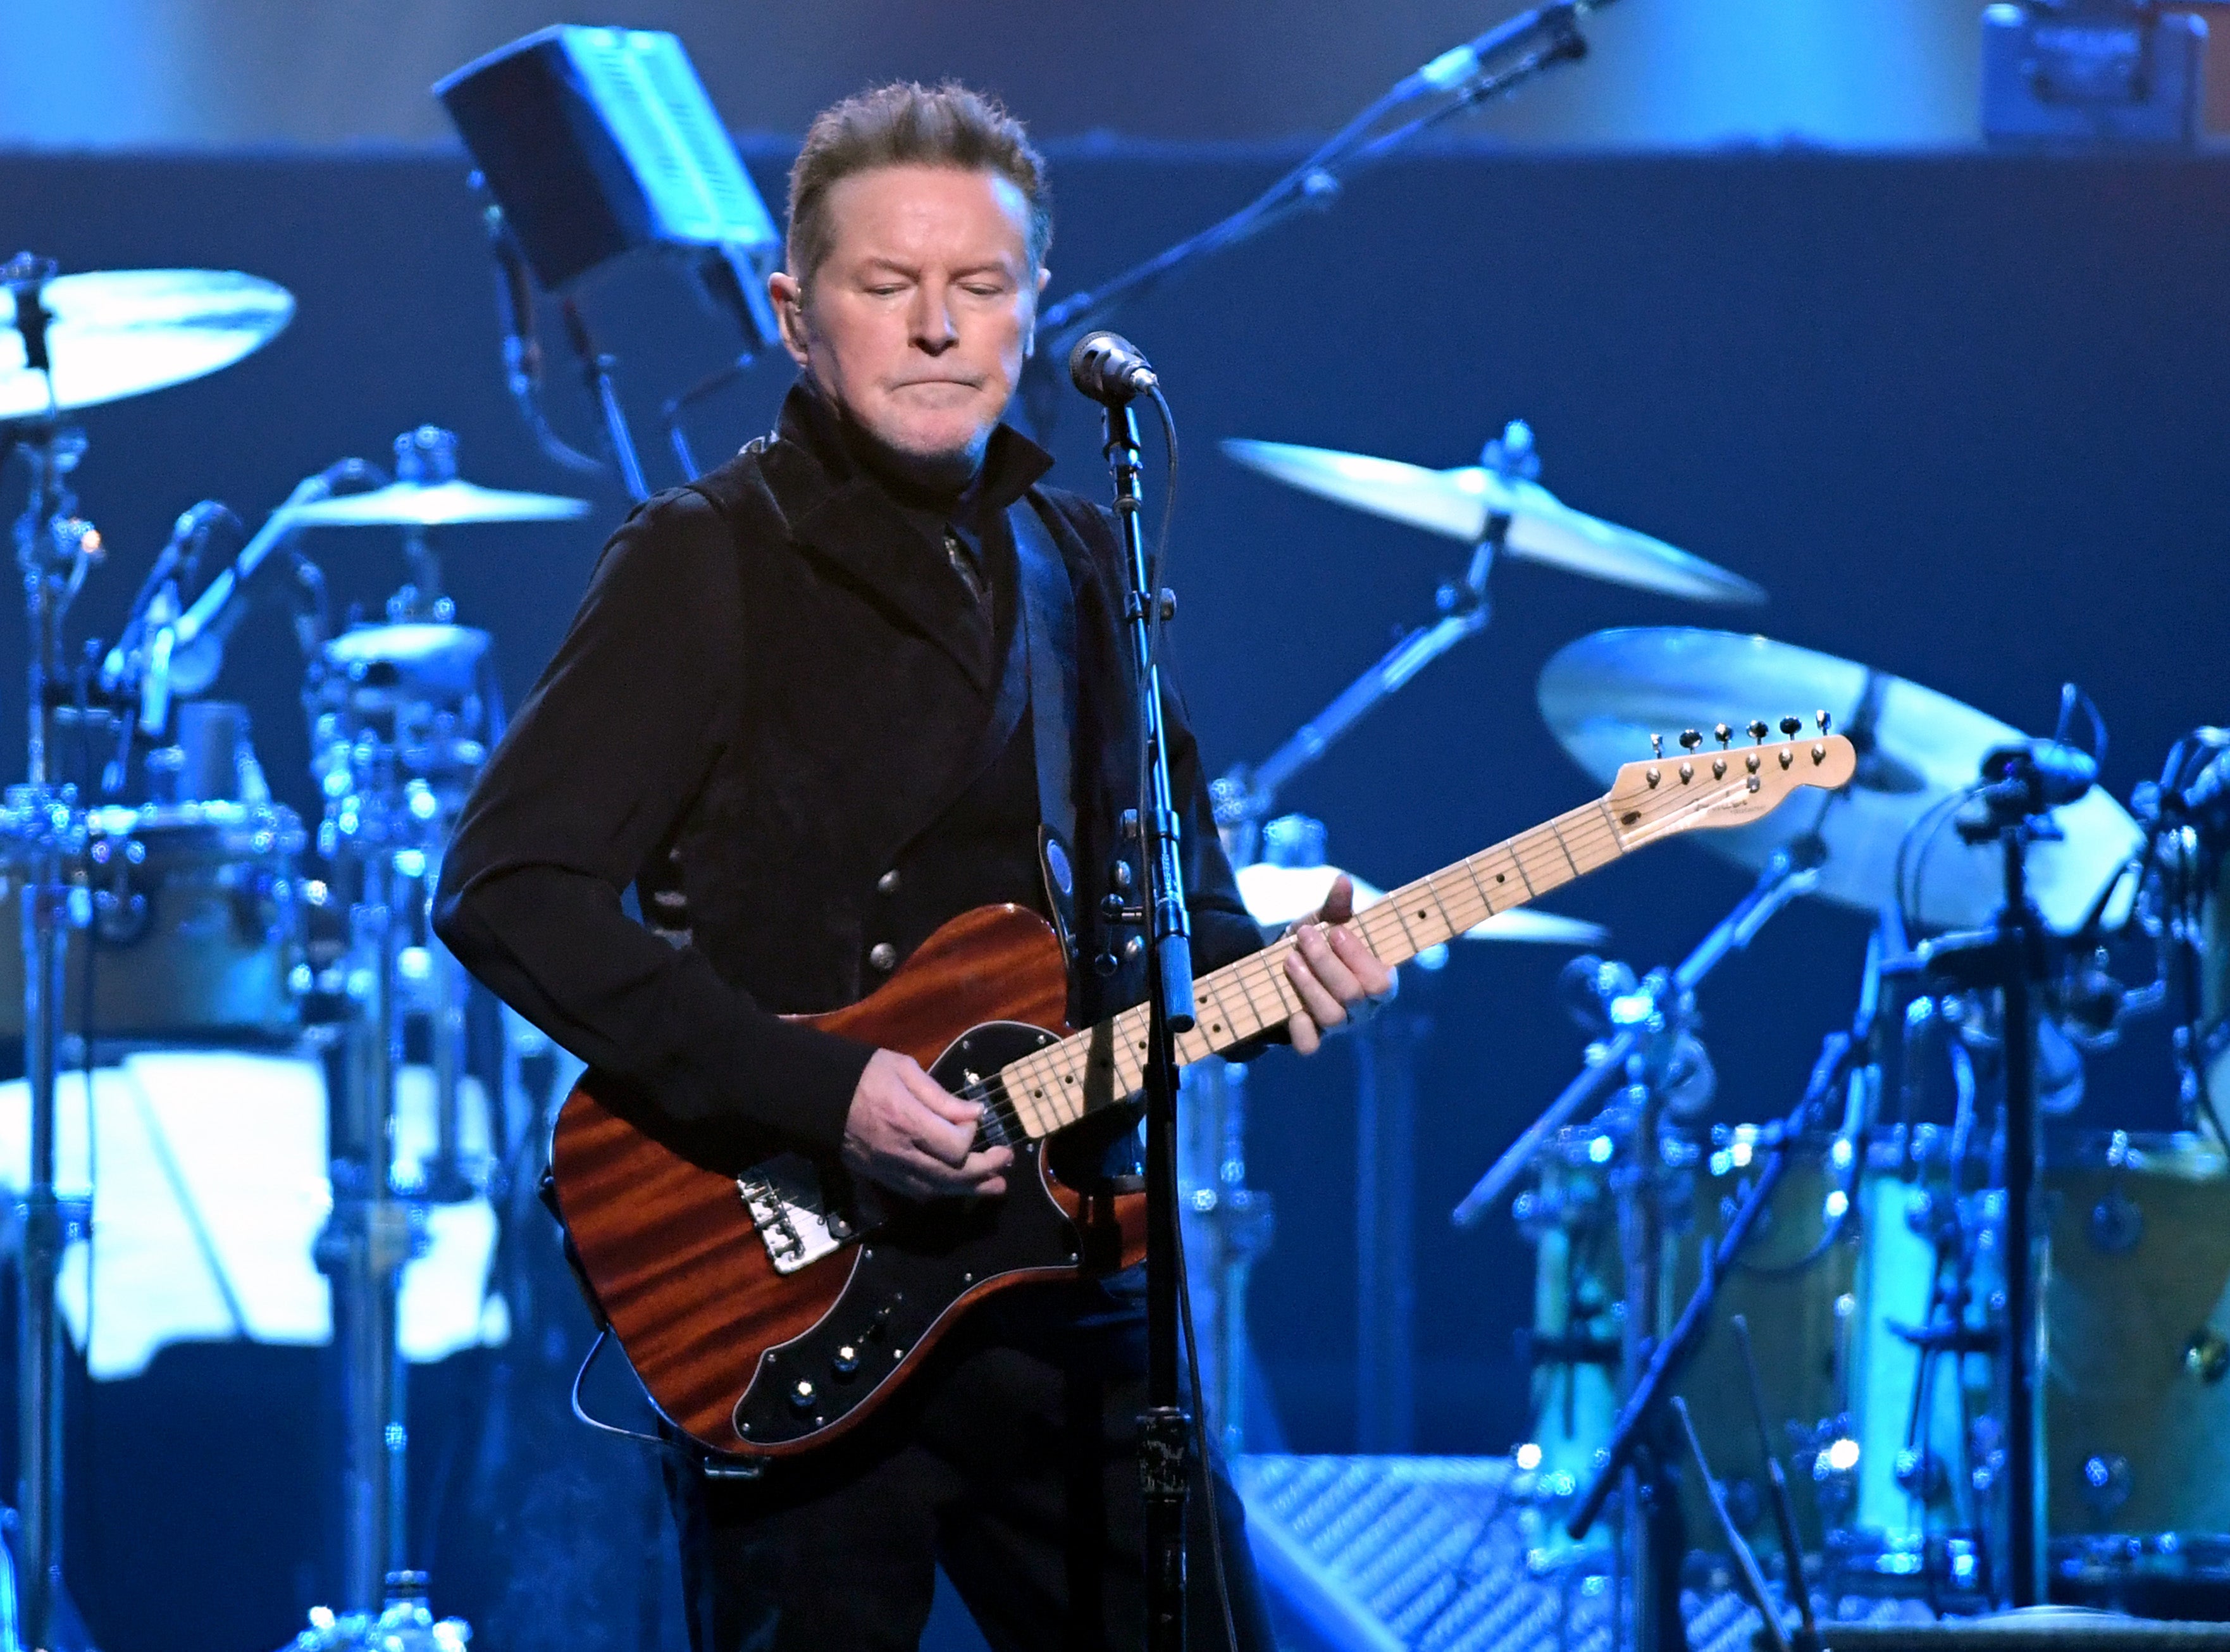 Don Henley on stage with the Eagles in Las Vegas in 2019